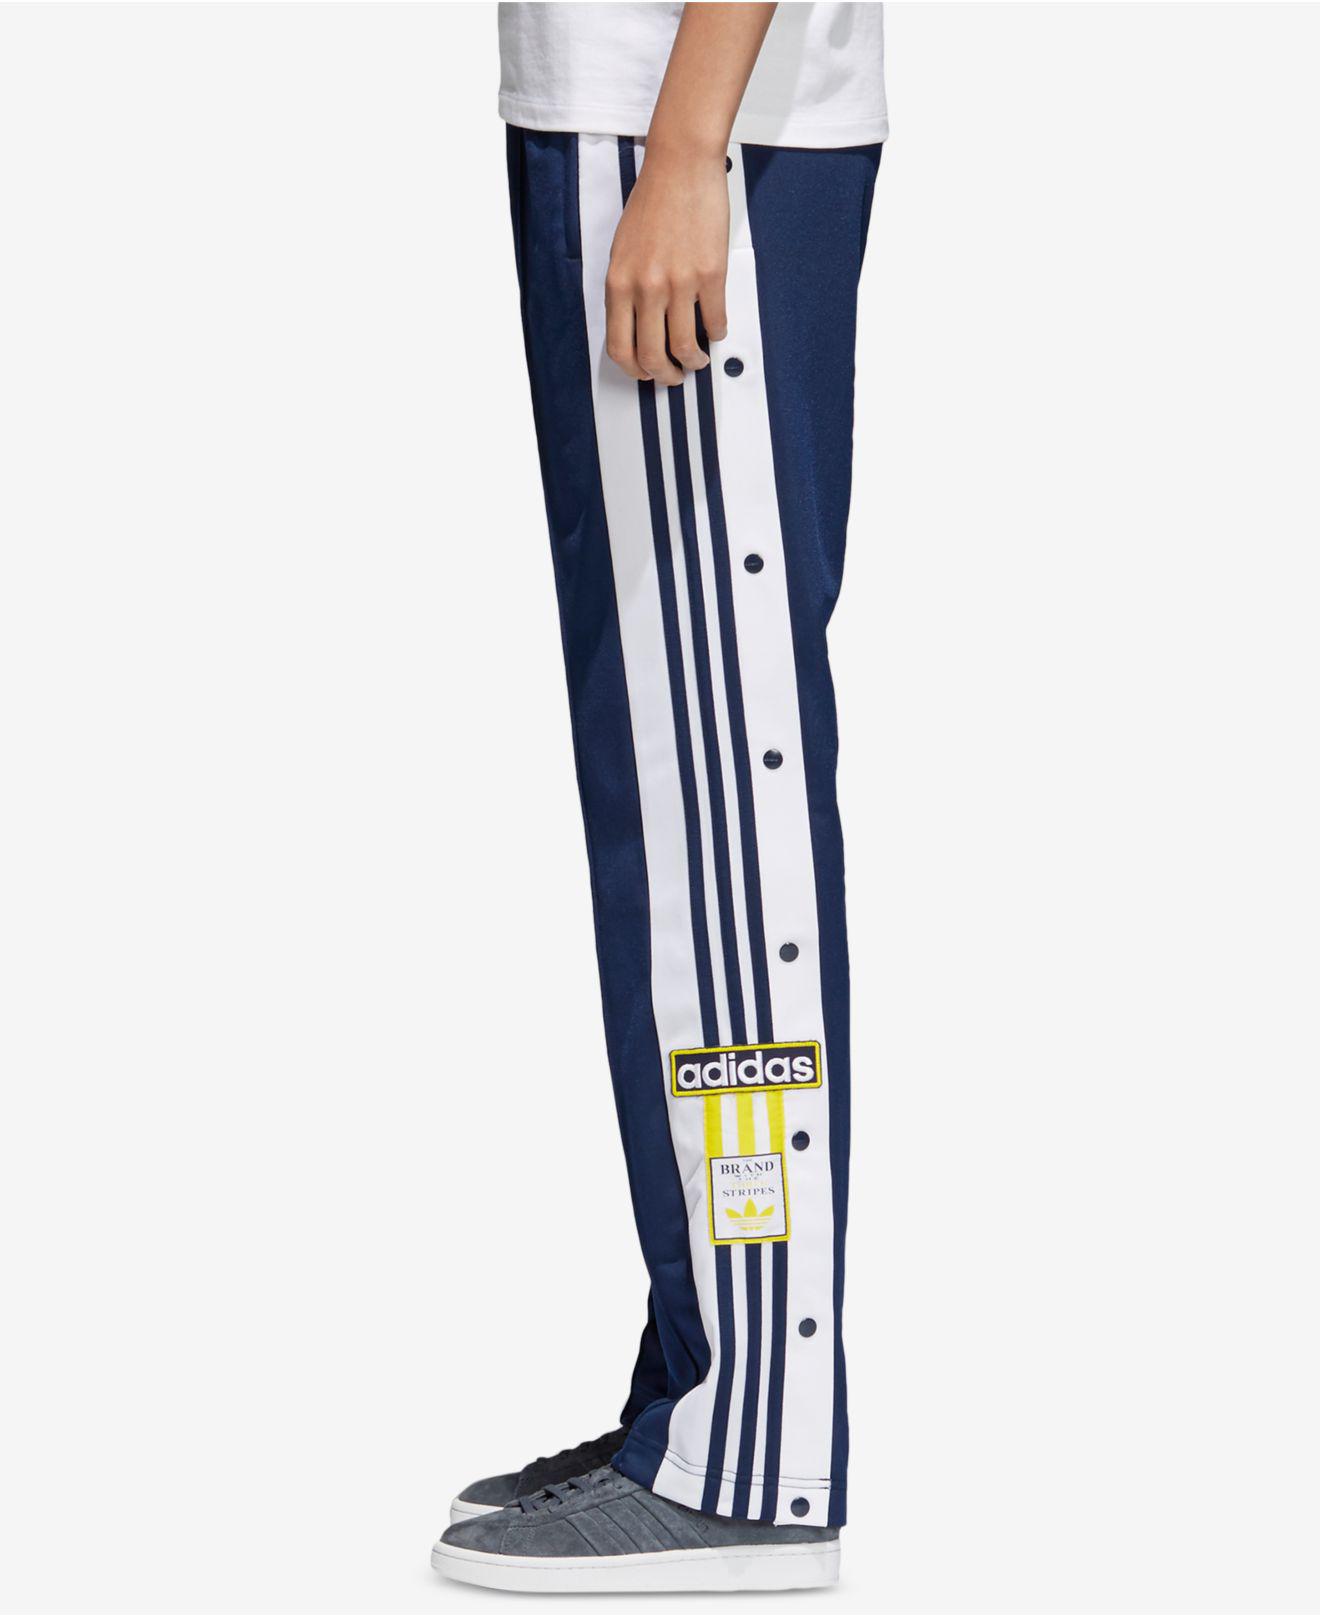 the brand with the three stripes sweatpants